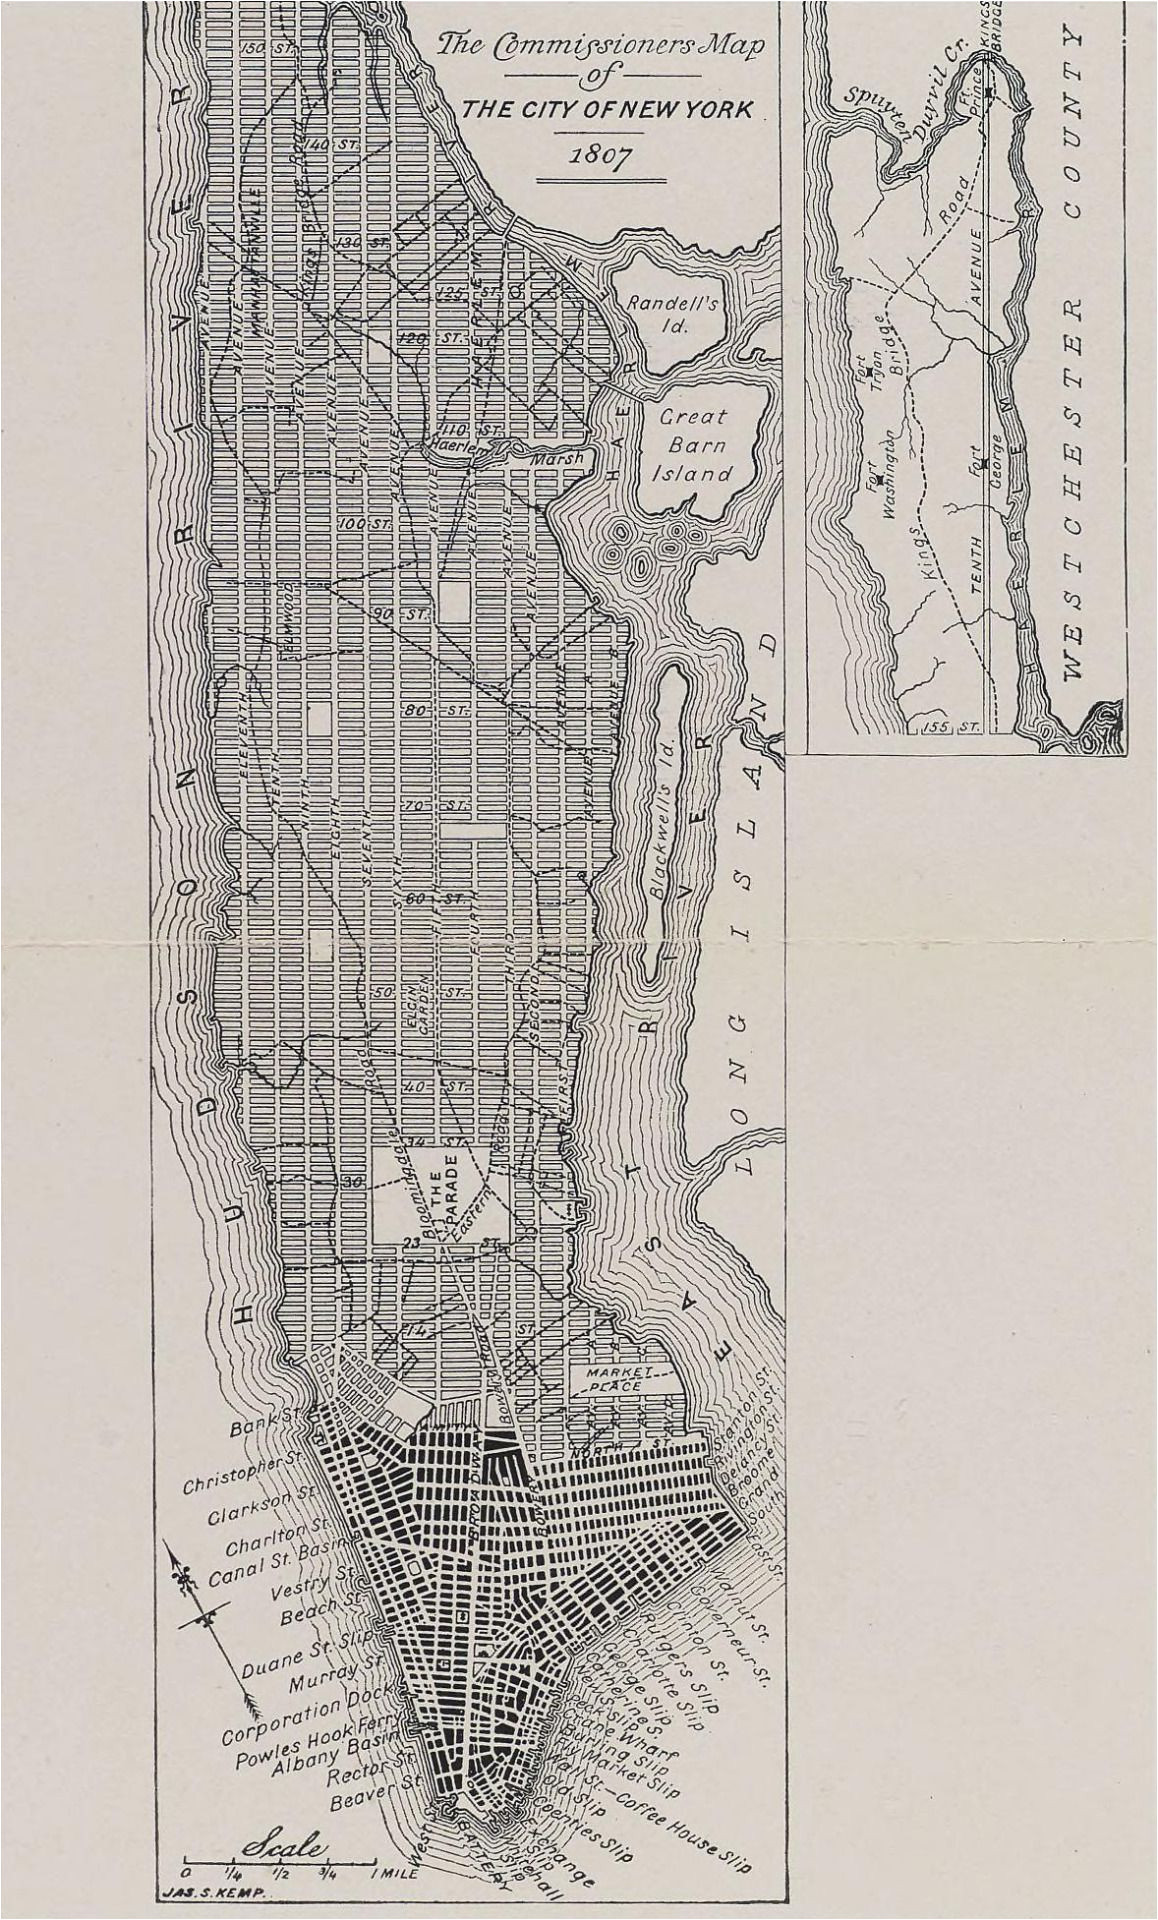 the commissioners plan of the city of new york in 1807 map all the